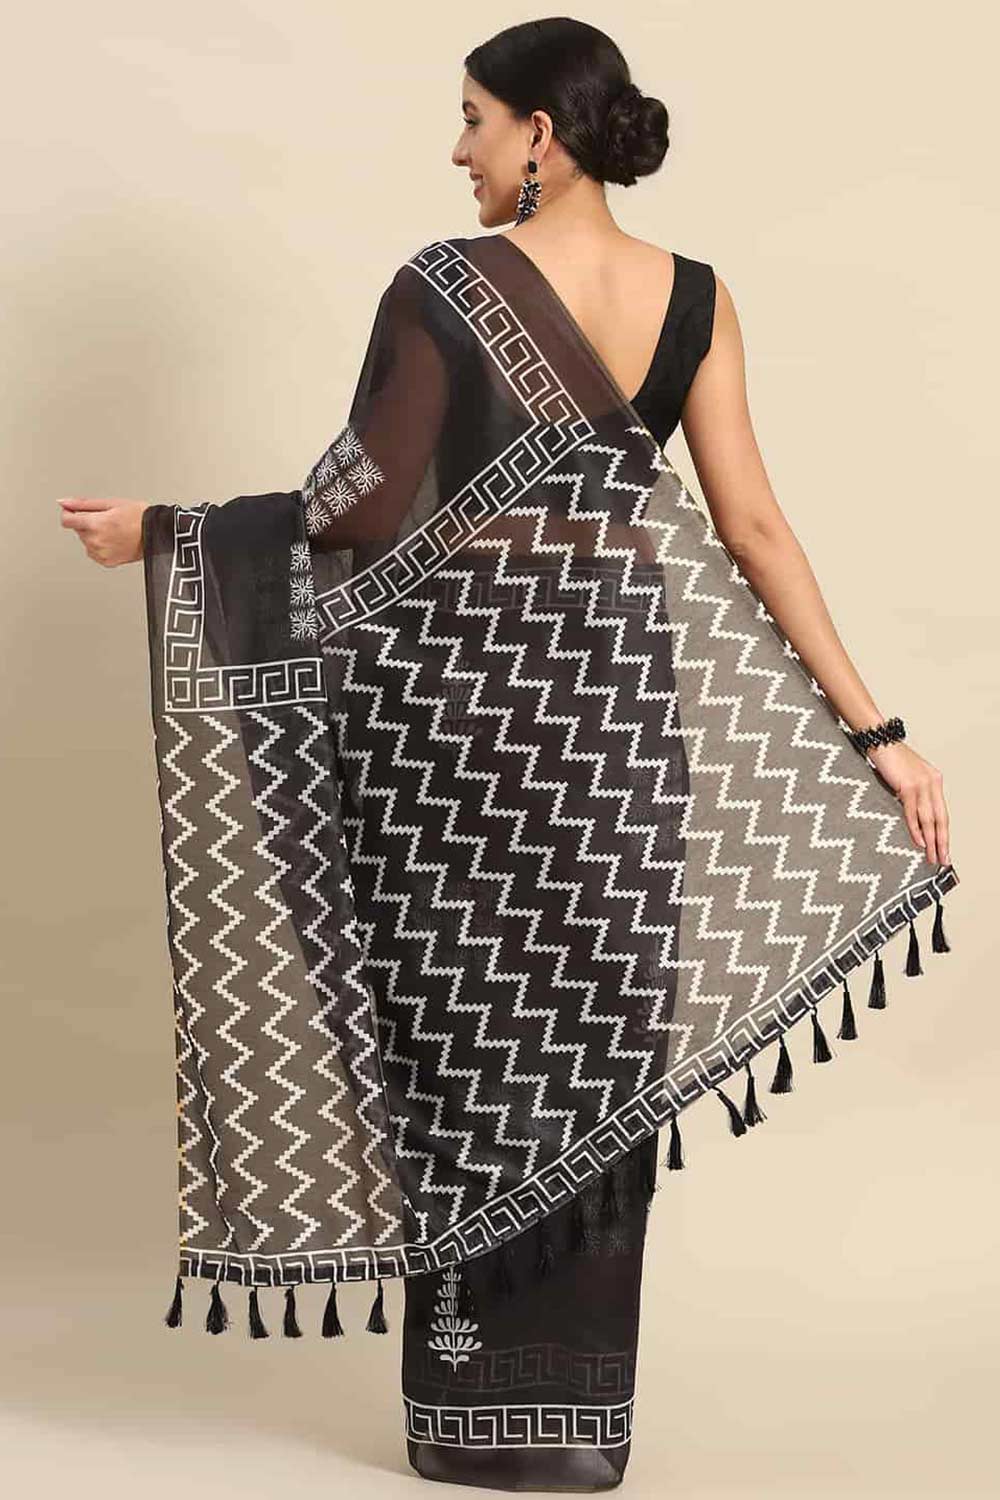 Shop Mausam Black Cotton Banarasi One Minute Saree at best offer at our  Store - One Minute Saree